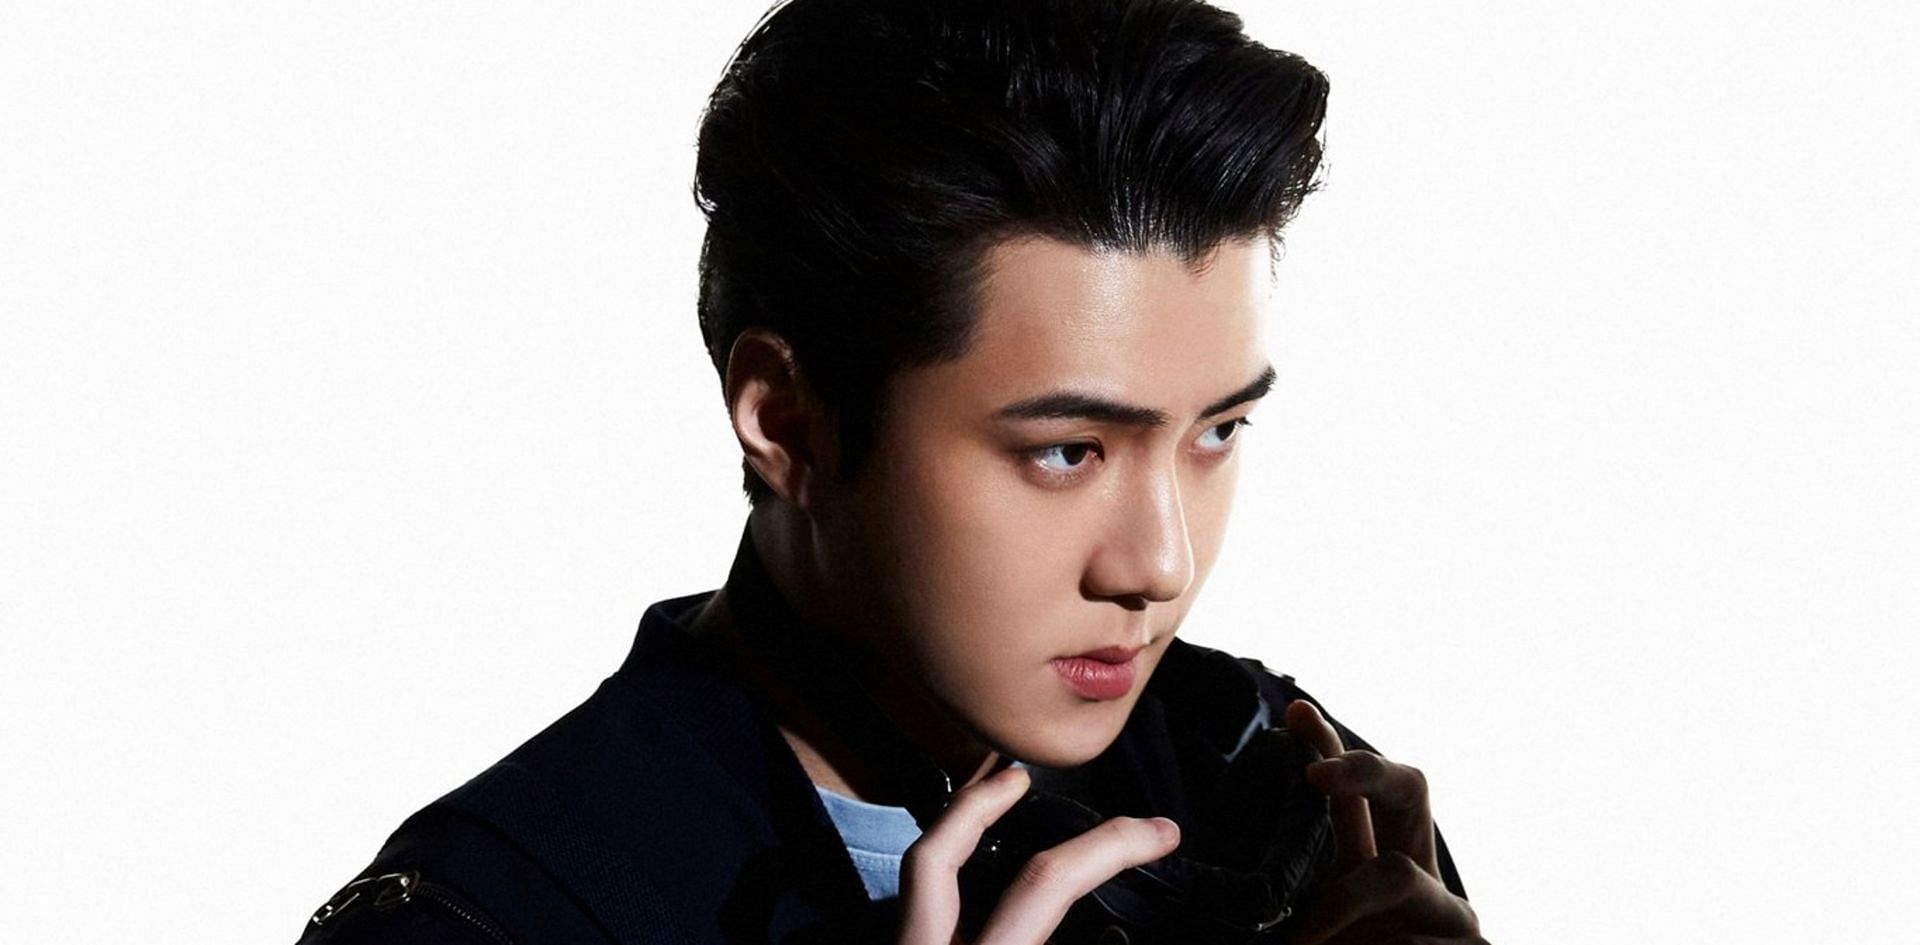 Sehun to possibly star in a new K-drama (Image via @weareoneEXO/Twitter)